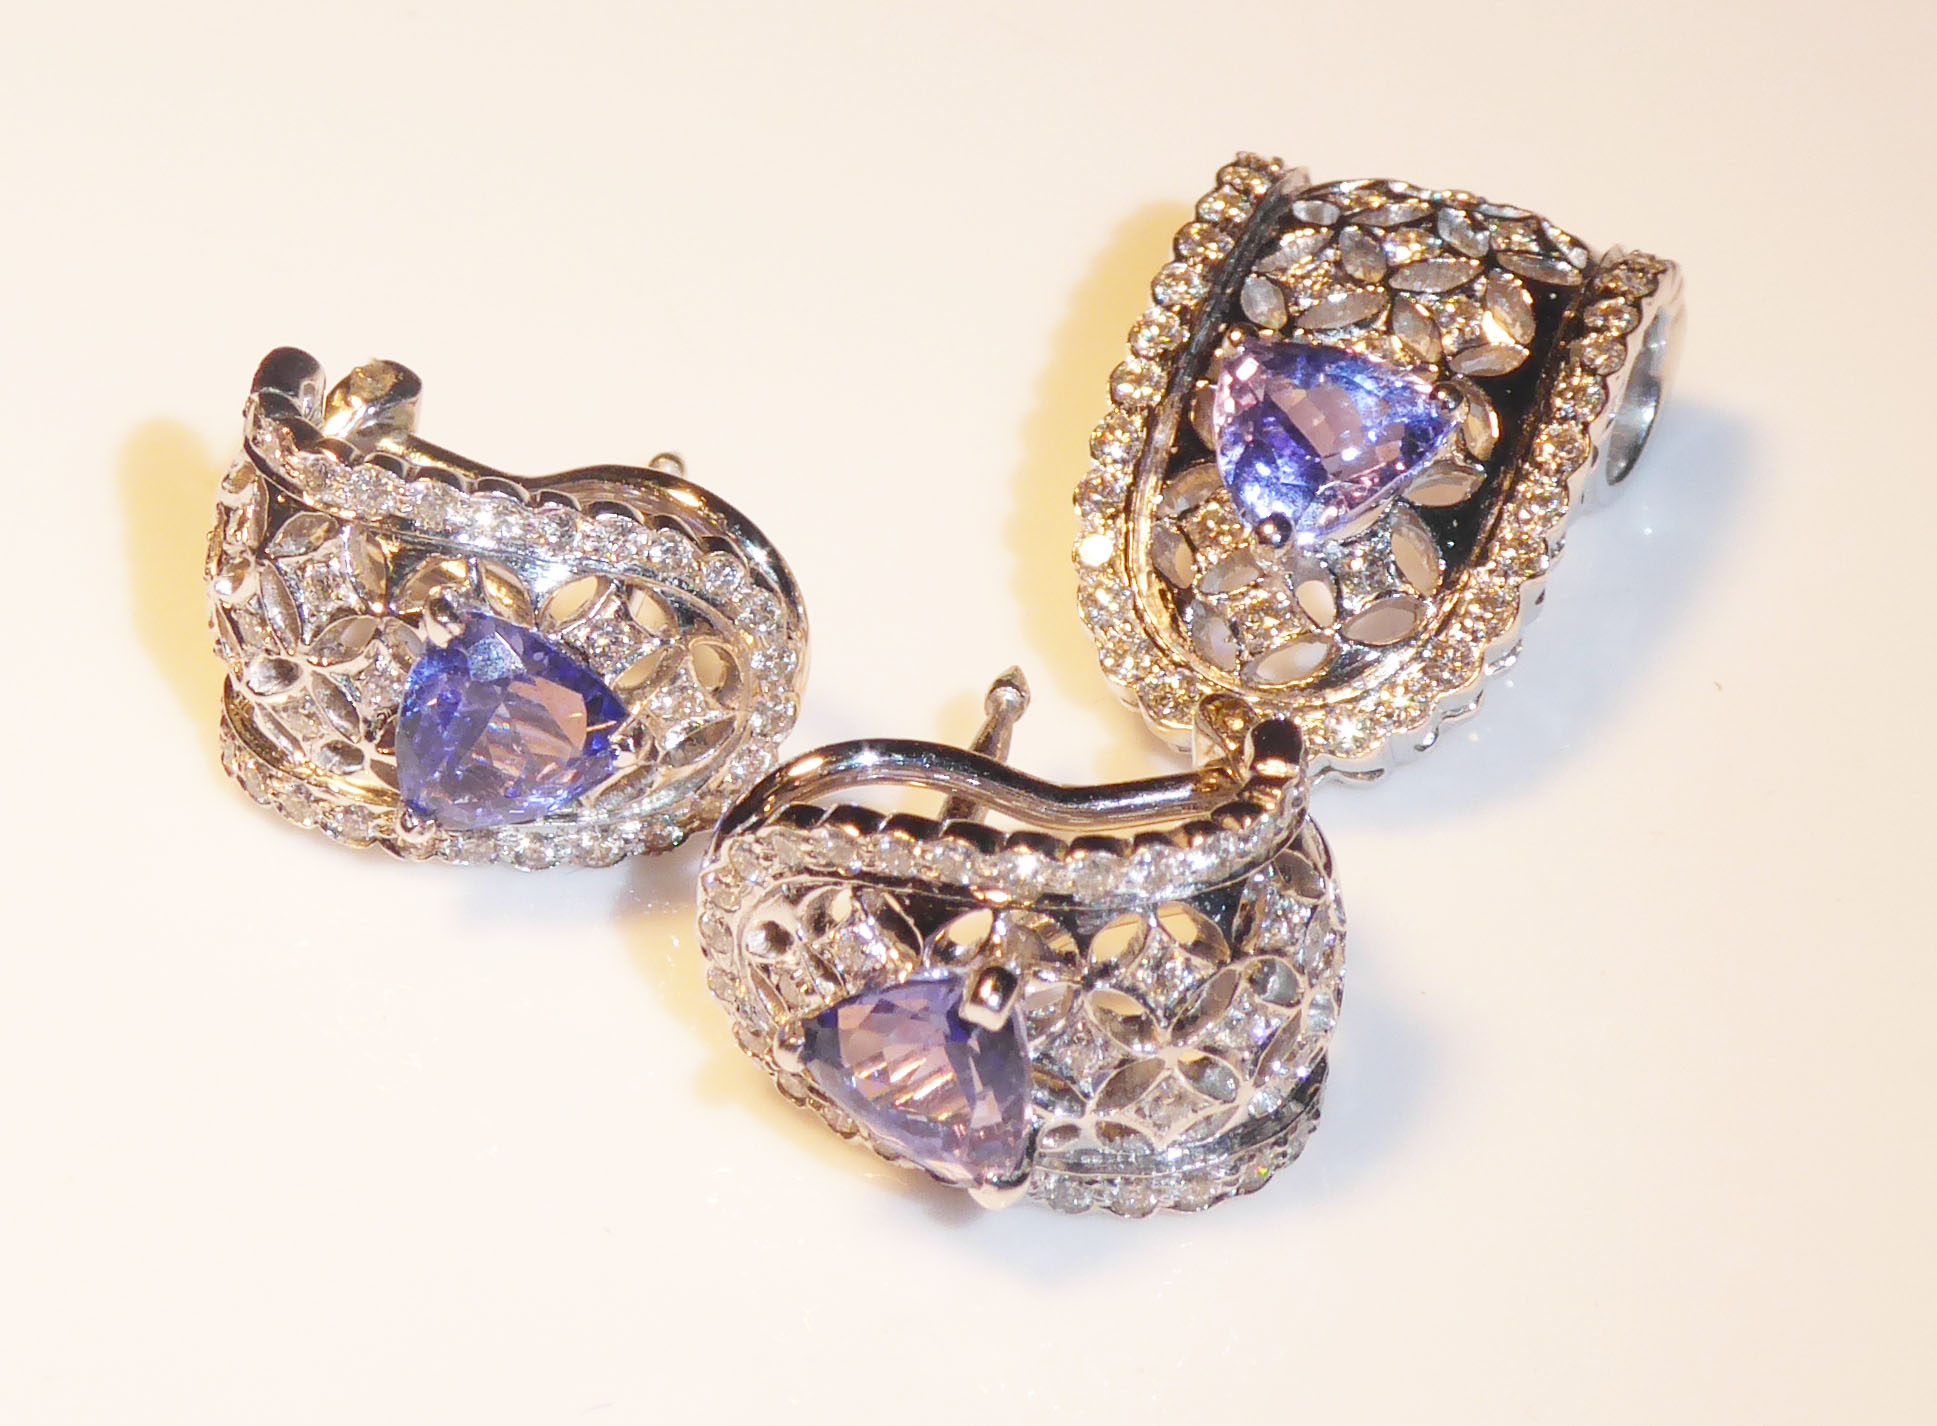 AN 18CT WHITE GOLD, TANZANITE AND DIAMOND PENDANT AND EARRING SET Each item with single tanzanite - Image 2 of 2